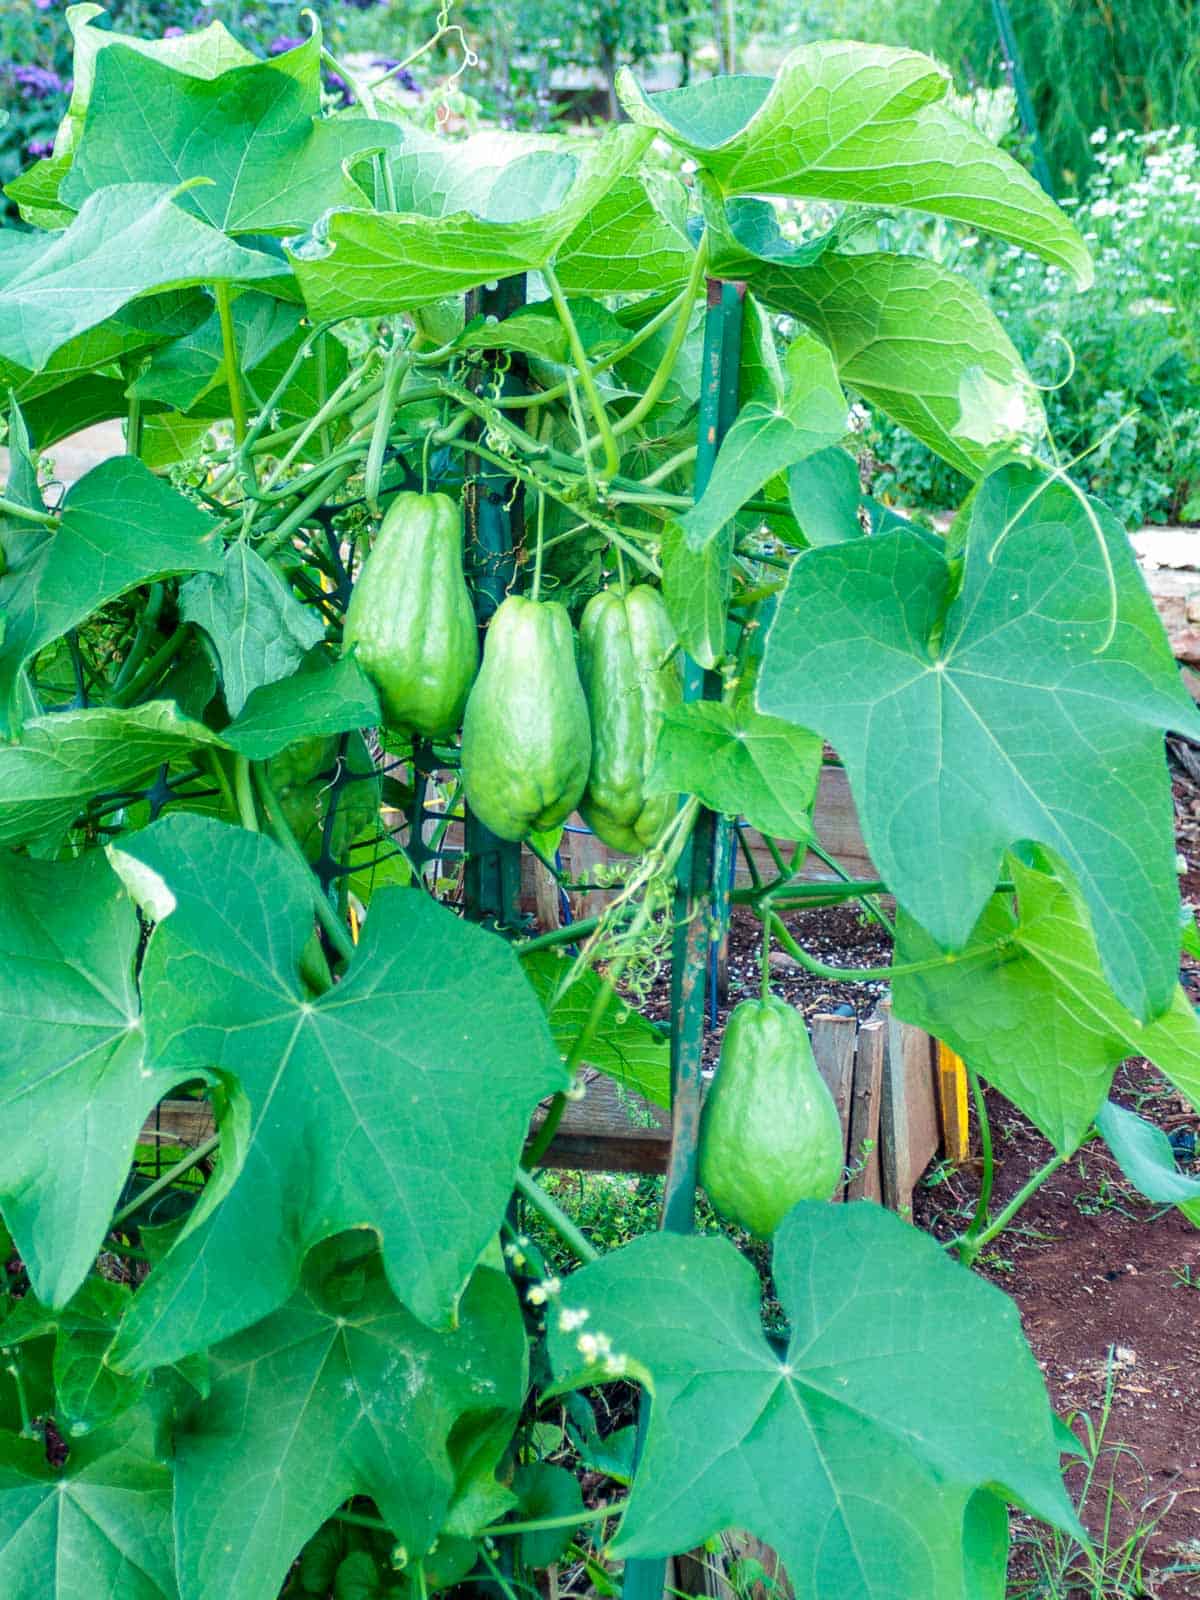 Four chayote squash hanging on the vine of garden plant.